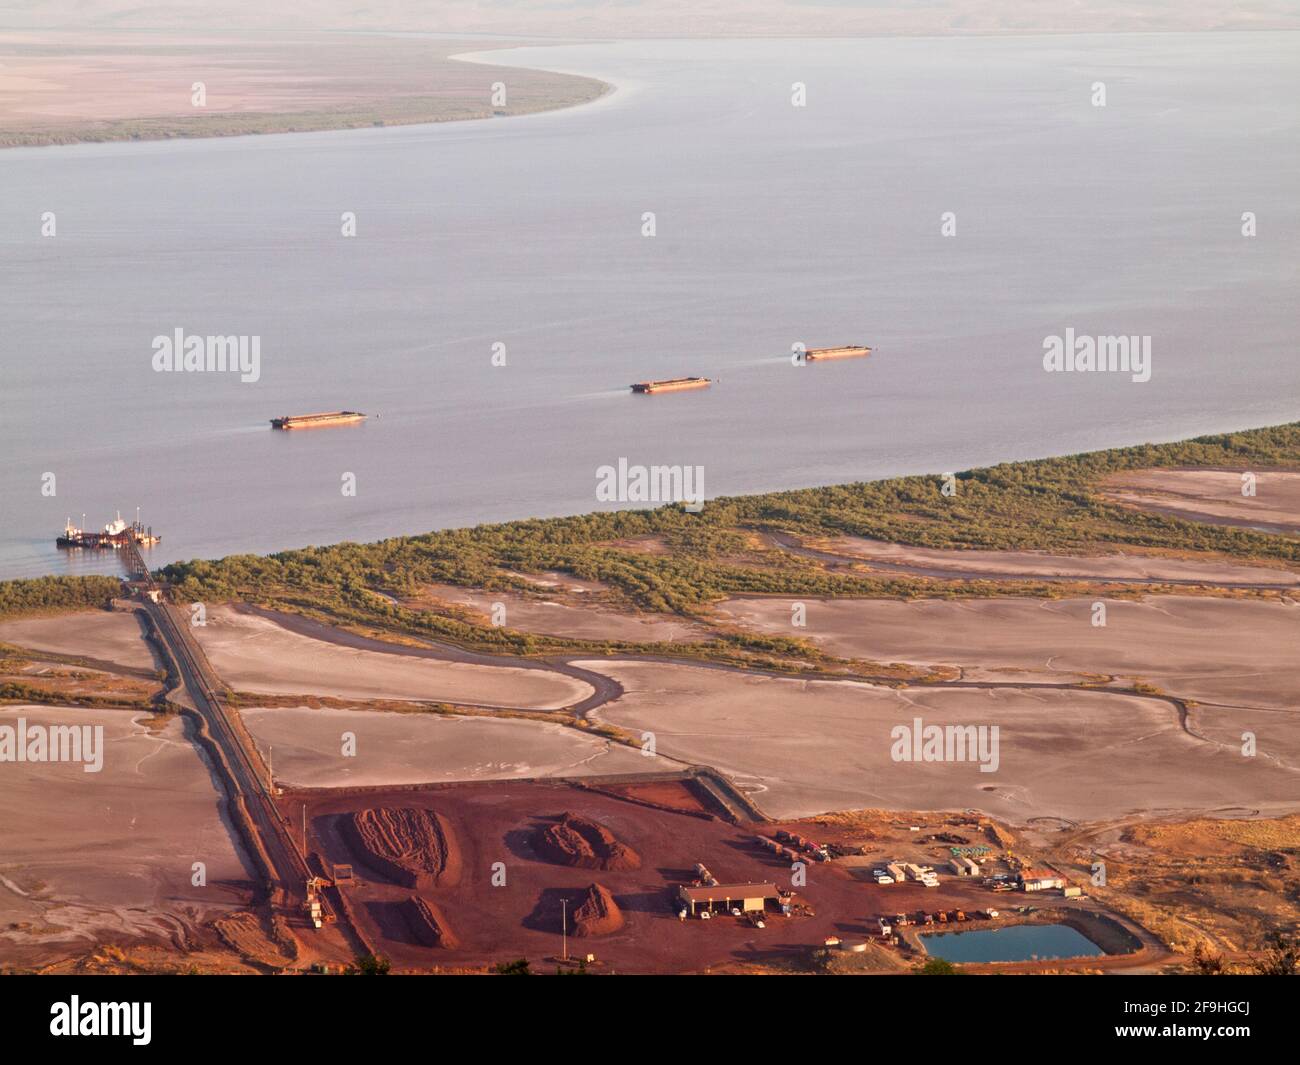 Barges lie in Cambridge Gulf, off the port of Wyndham, East Kimberley Stock Photo